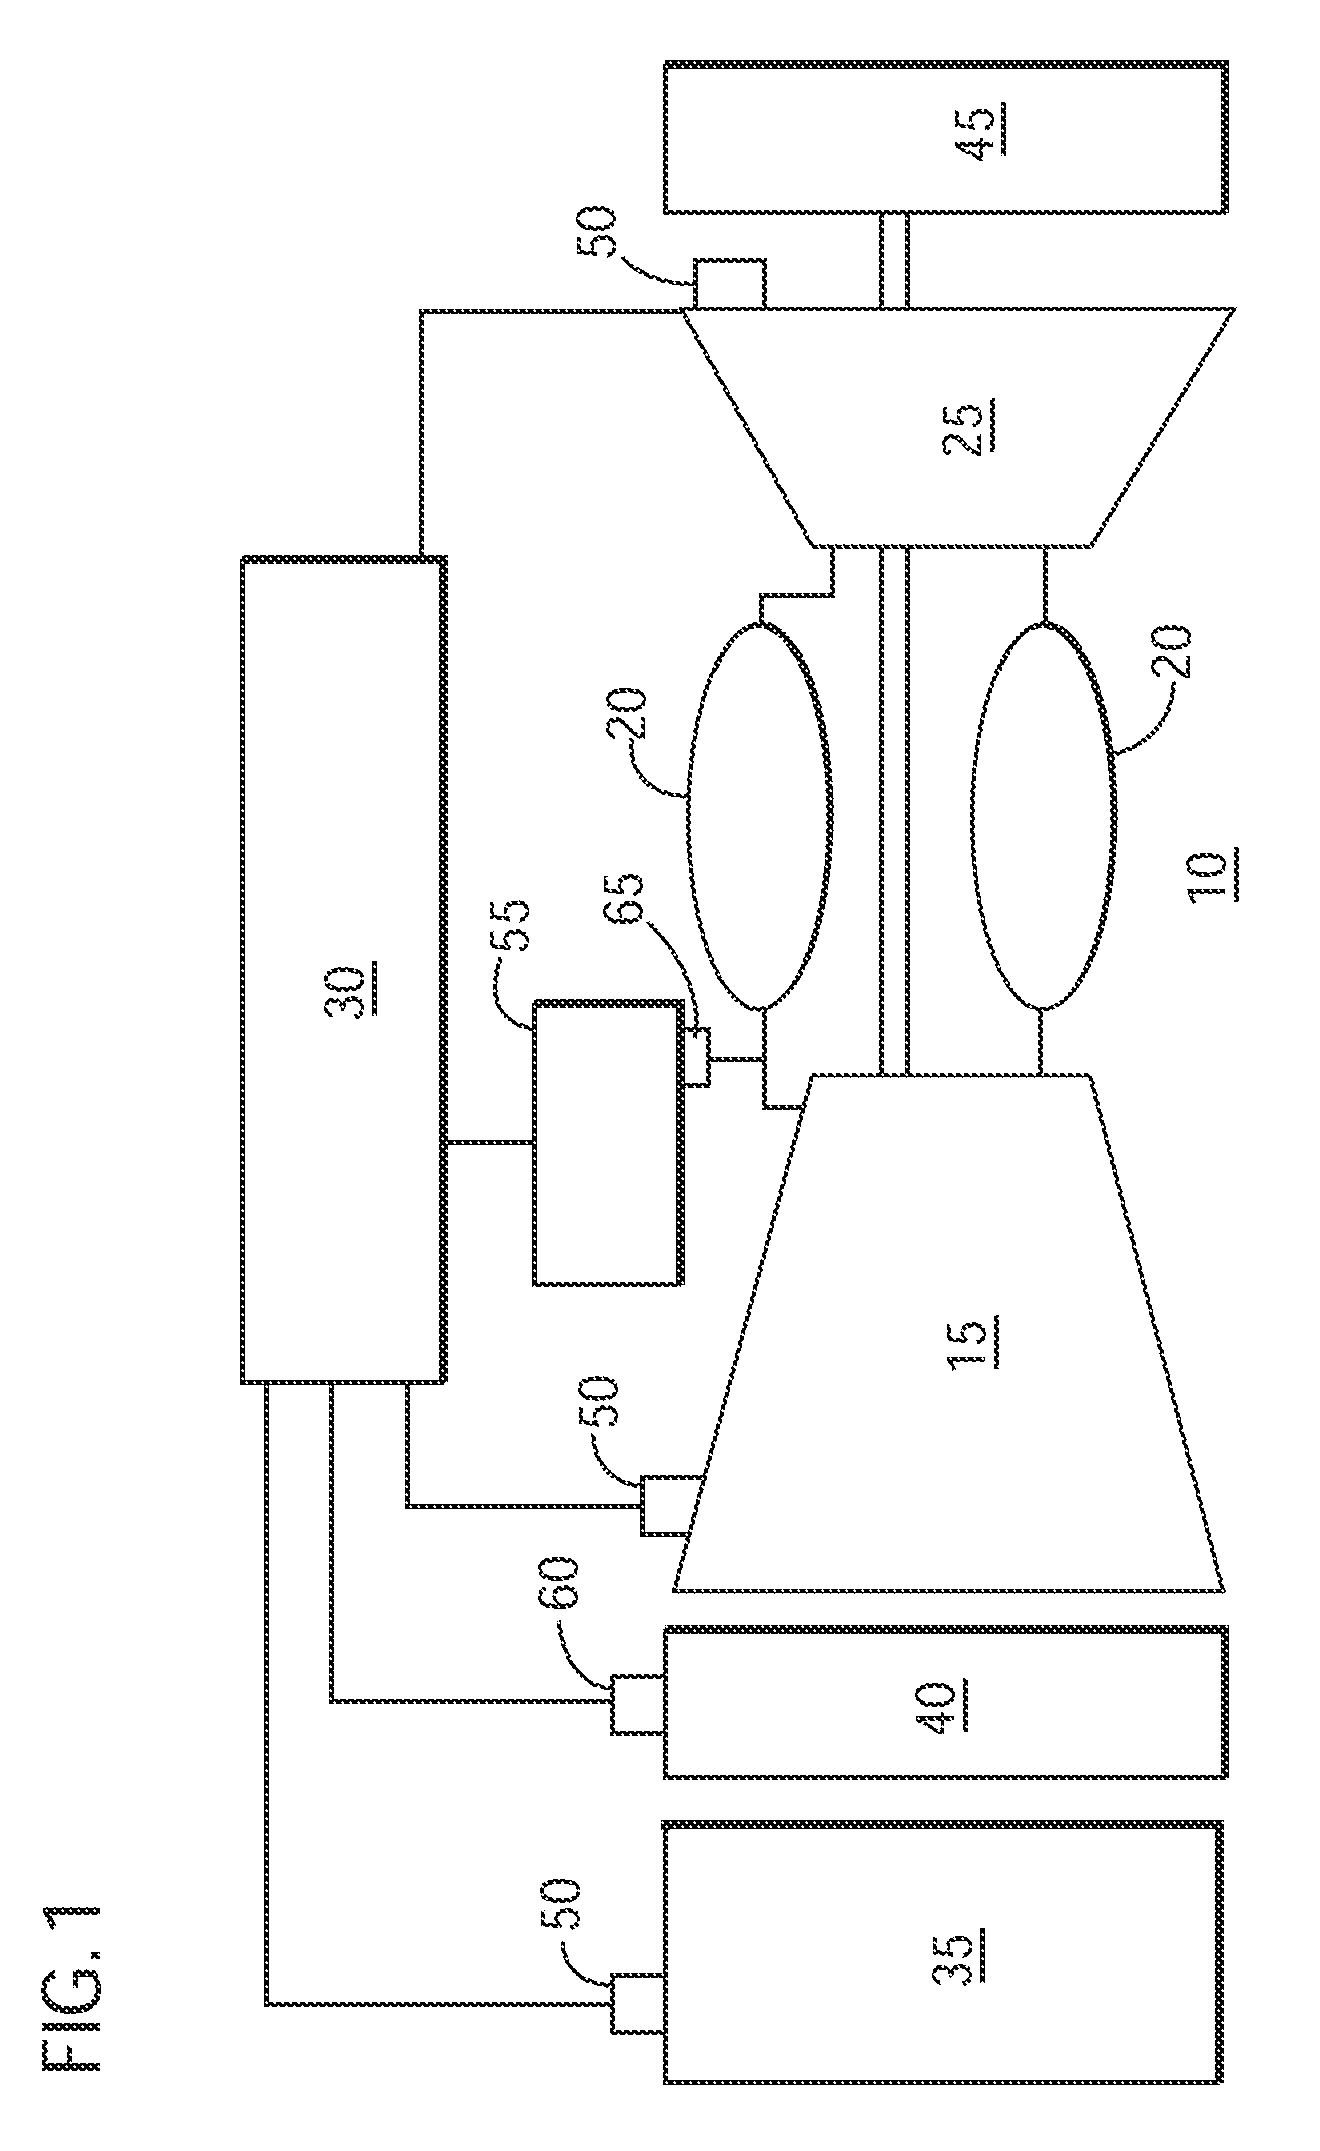 Method and system for actively tuning a valve